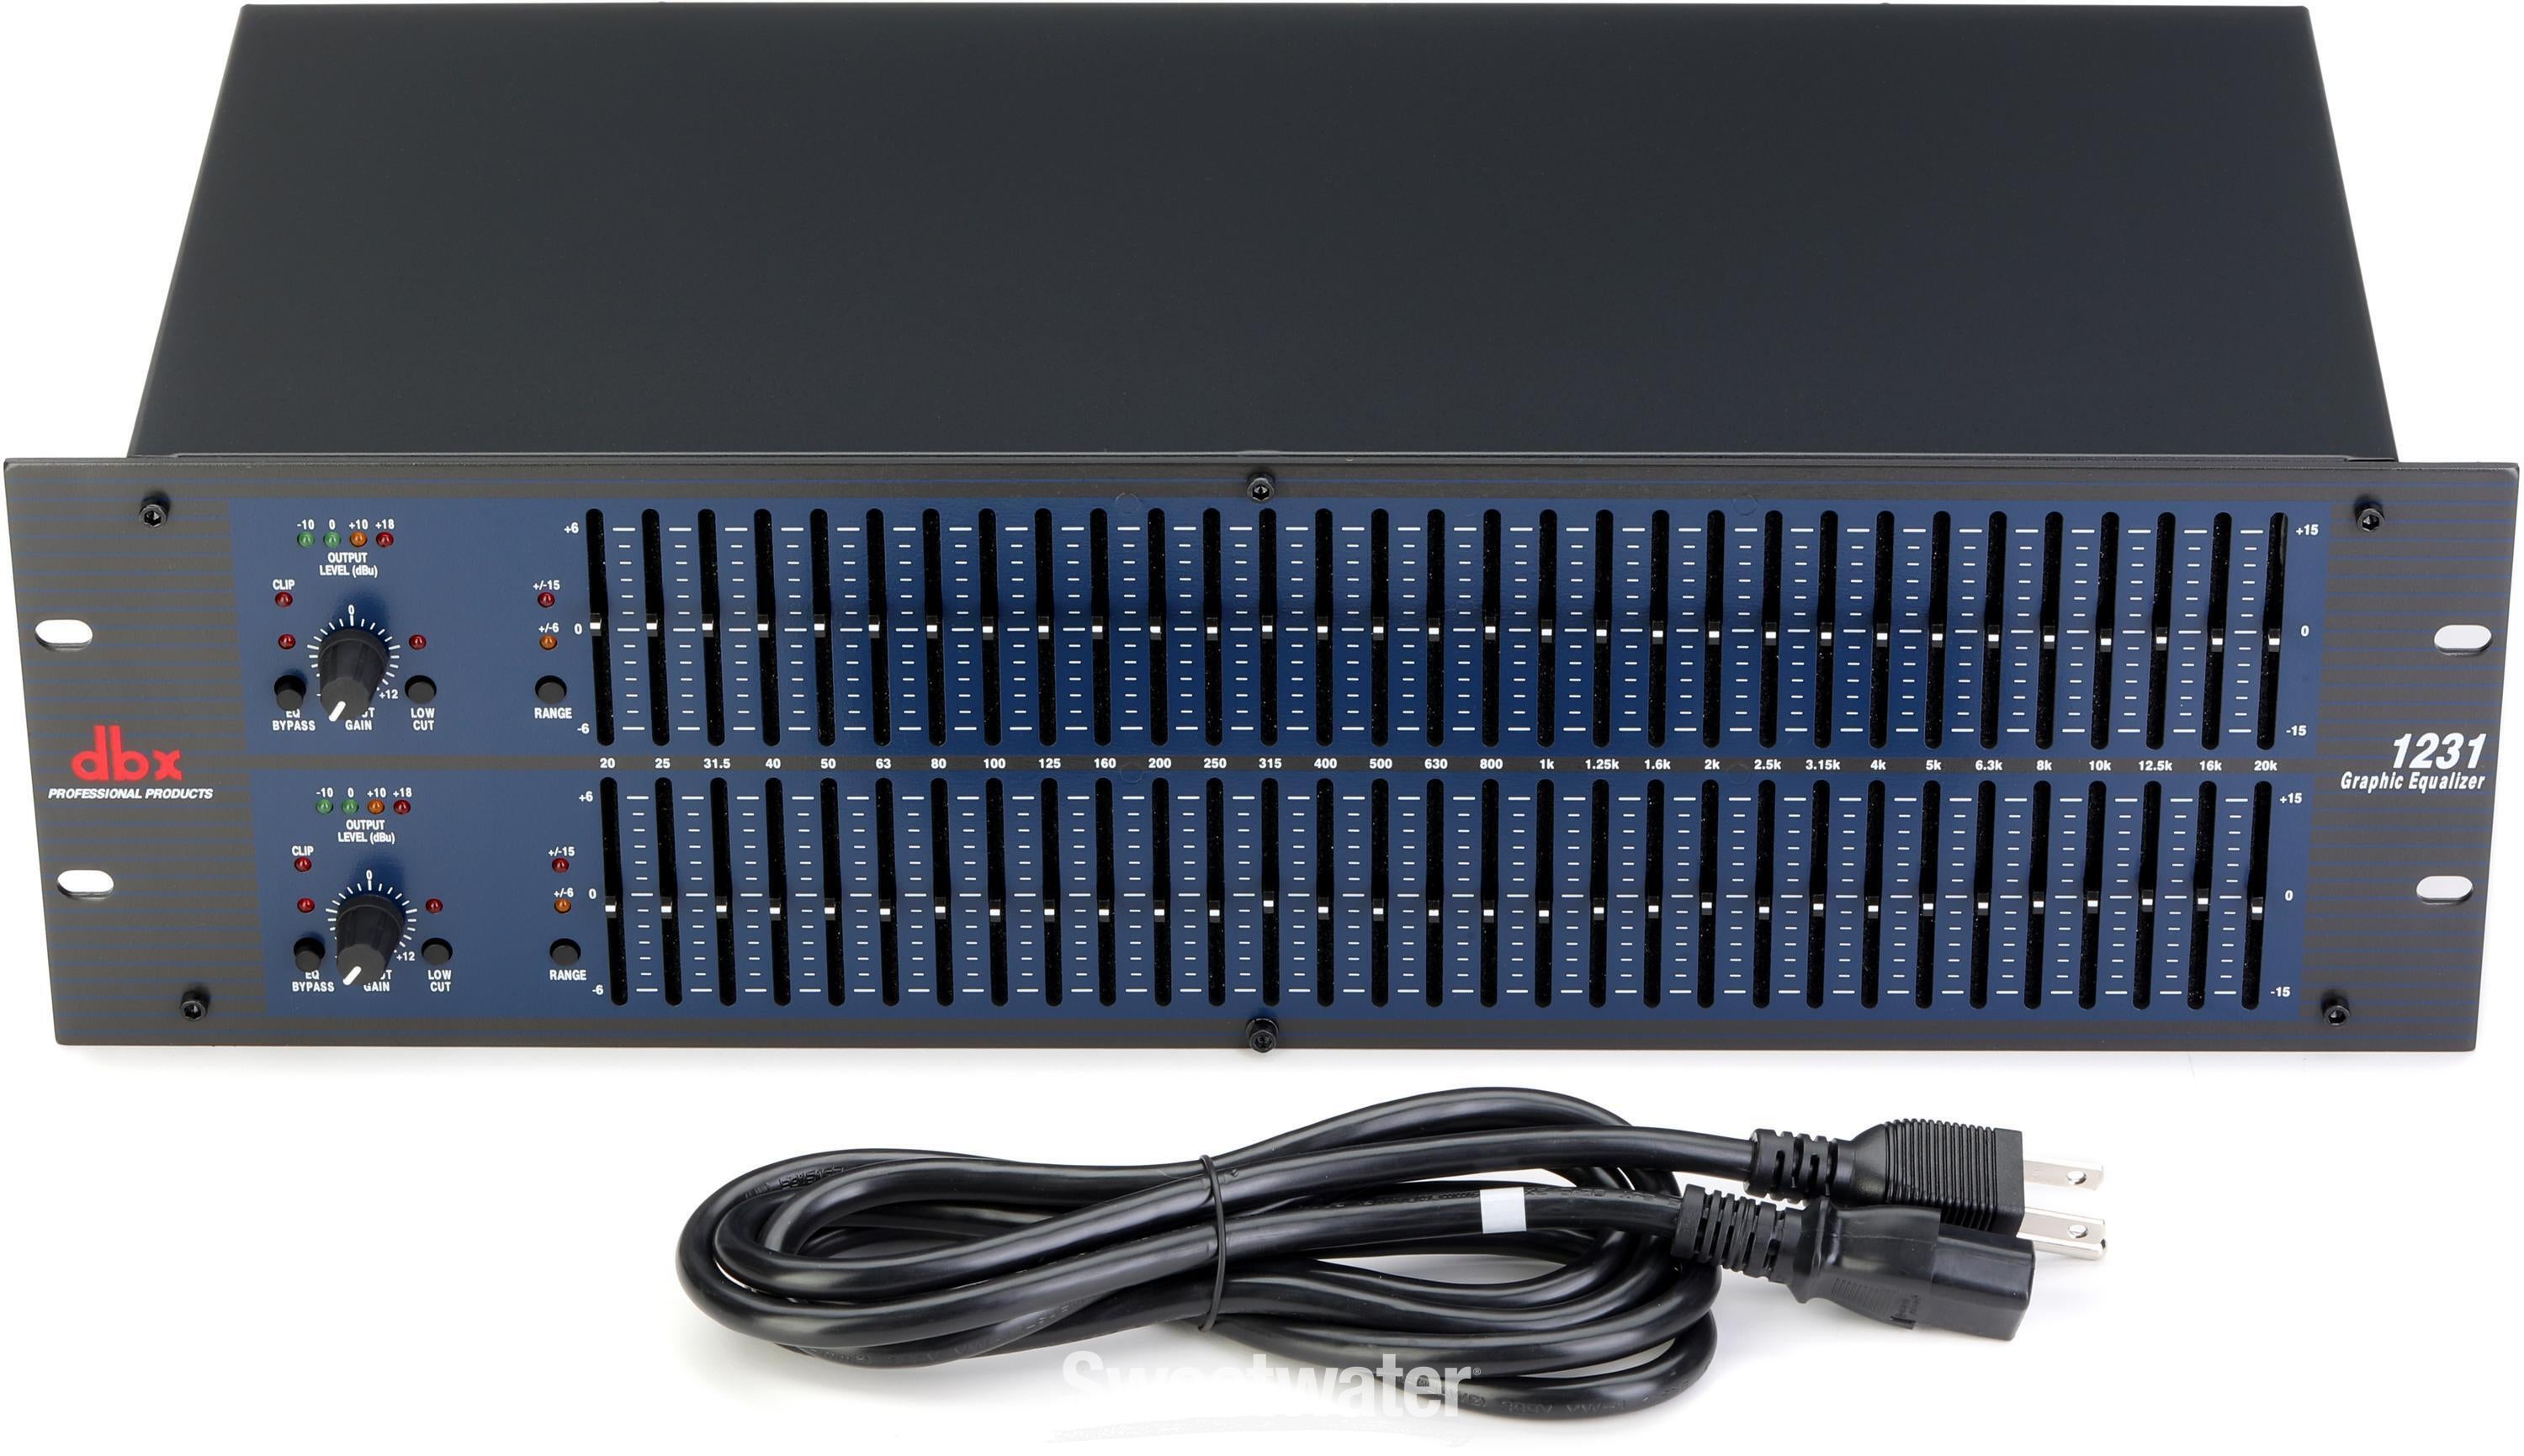 dbx 1231 Dual 31-band Graphic Equalizer